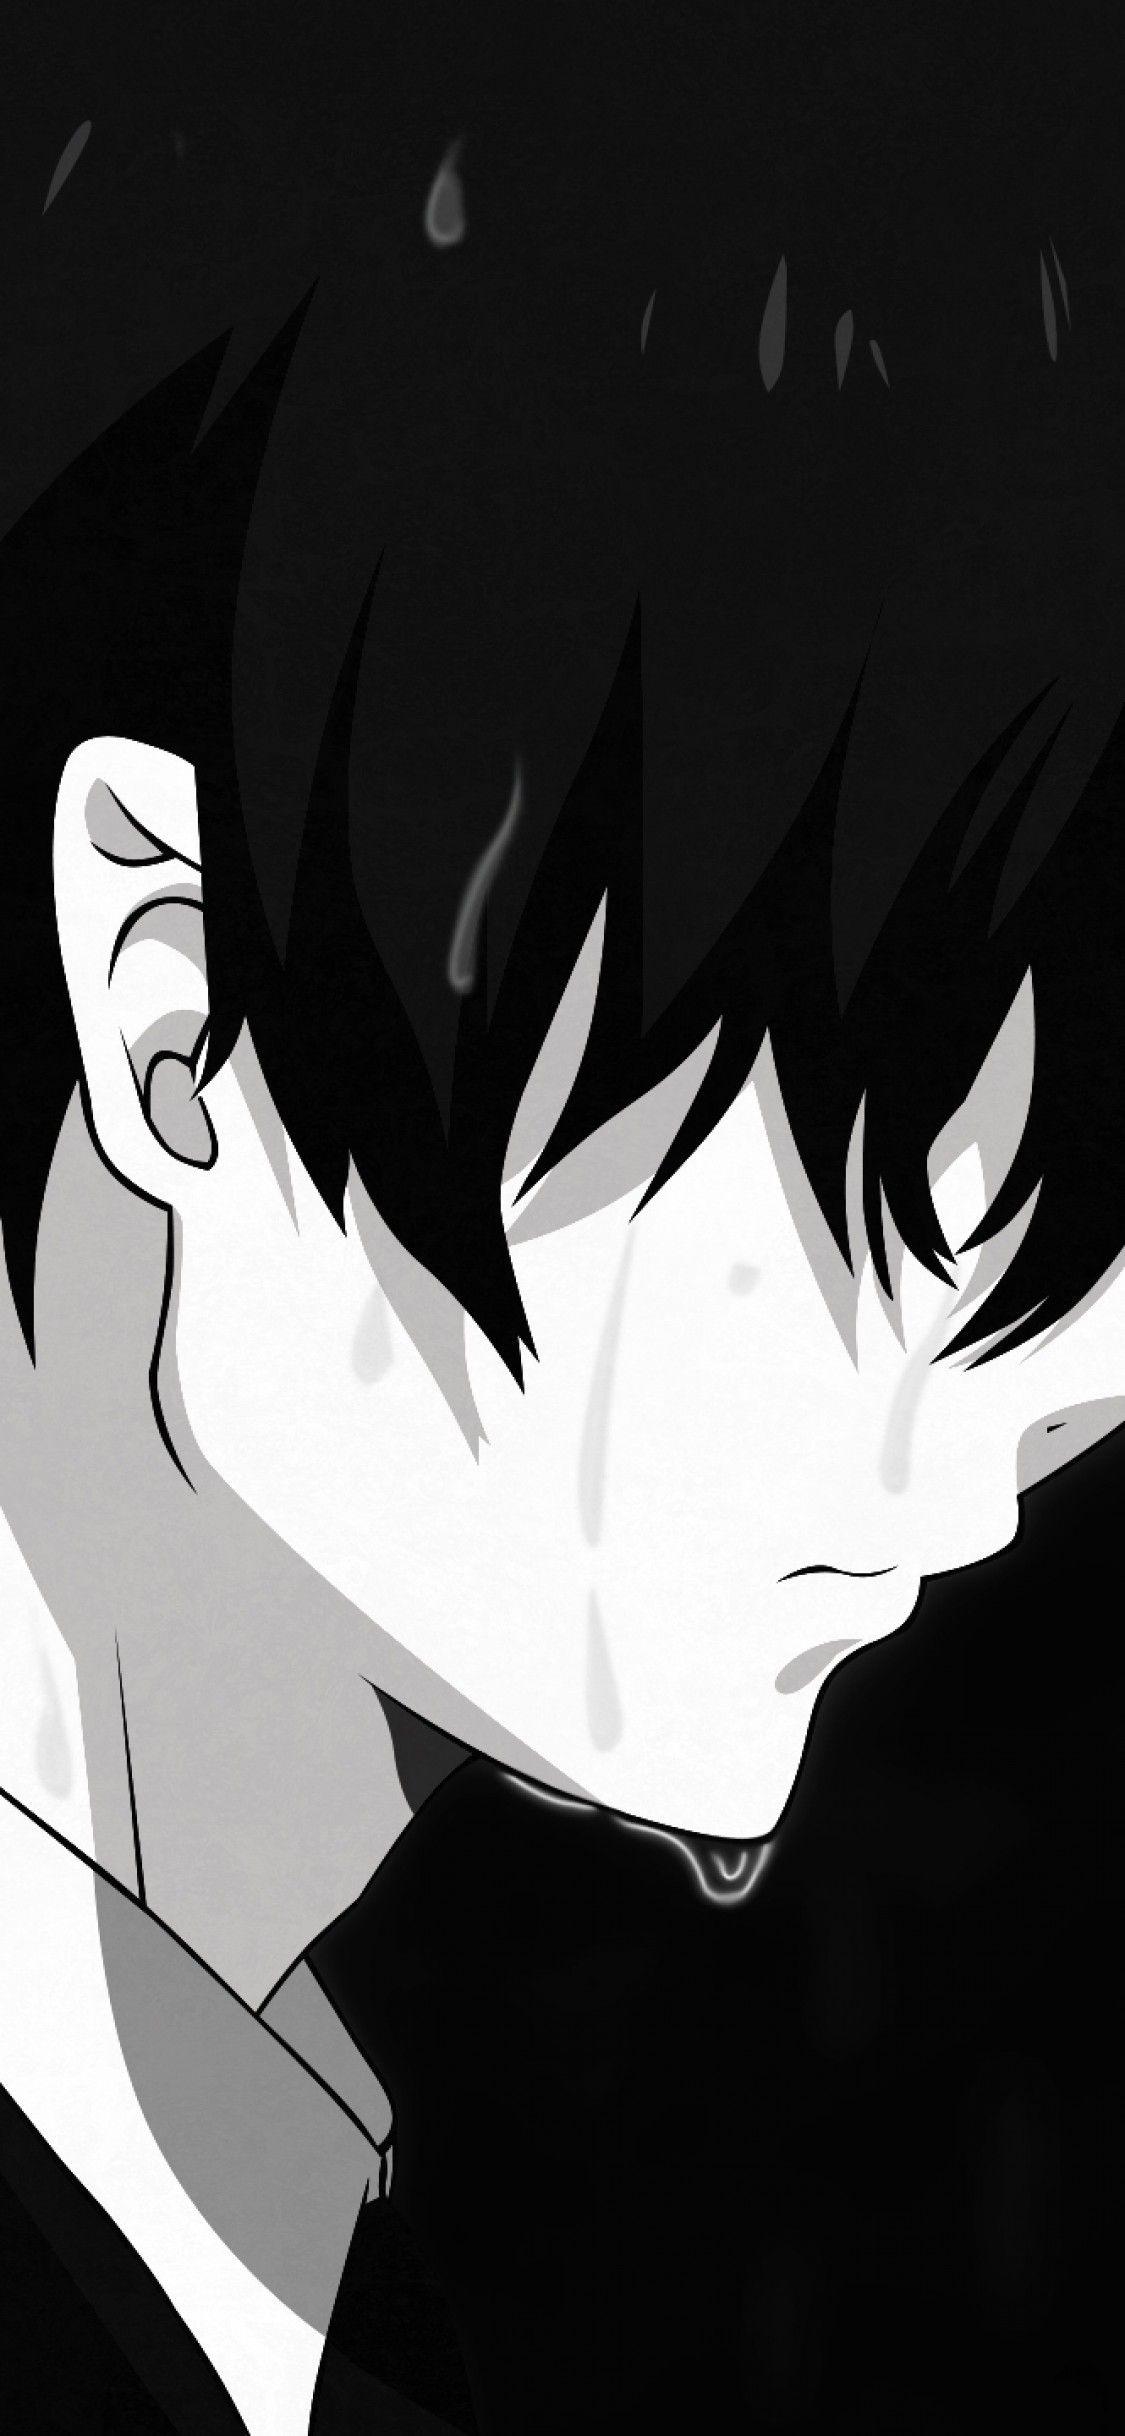 Anime Sad Black And White Wallpapers - Wallpaper Cave